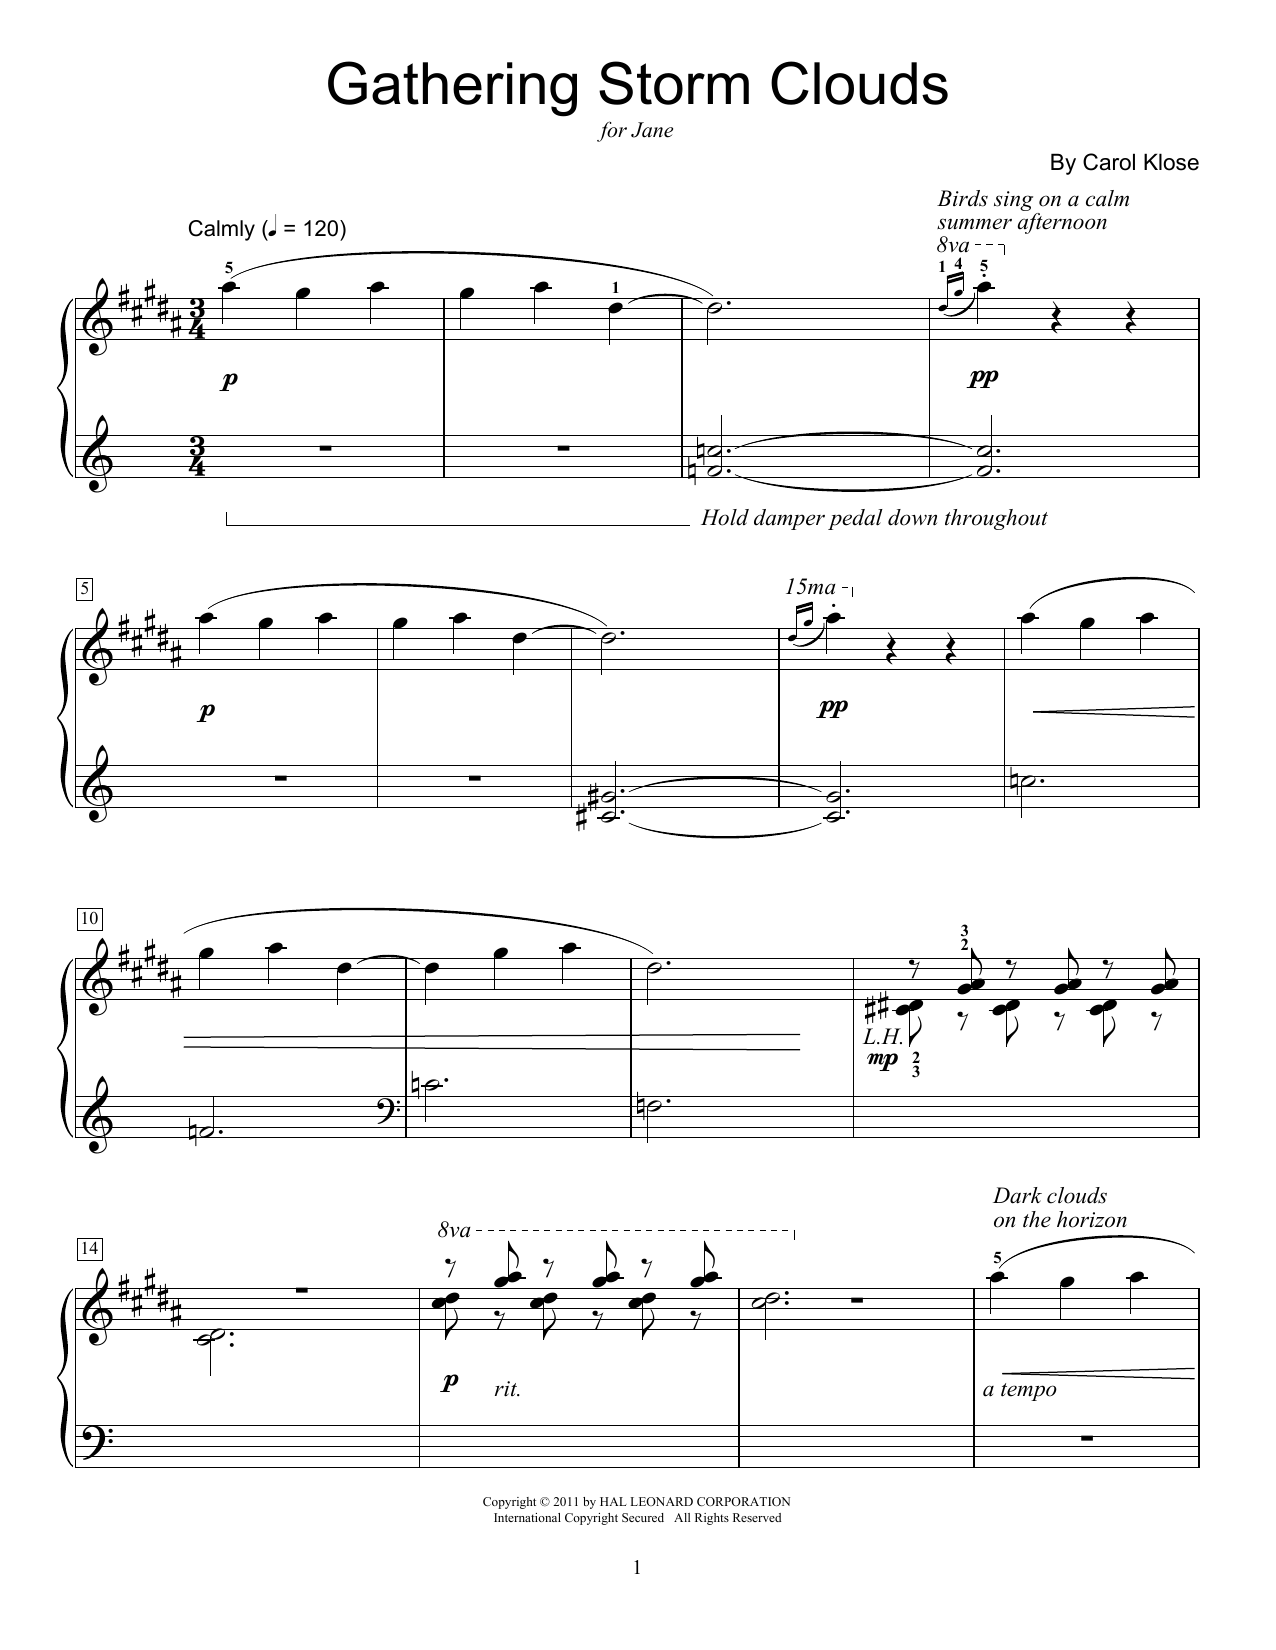 Download Carol Klose Gathering Storm Clouds sheet music and printable PDF score & Easy Listening music notes